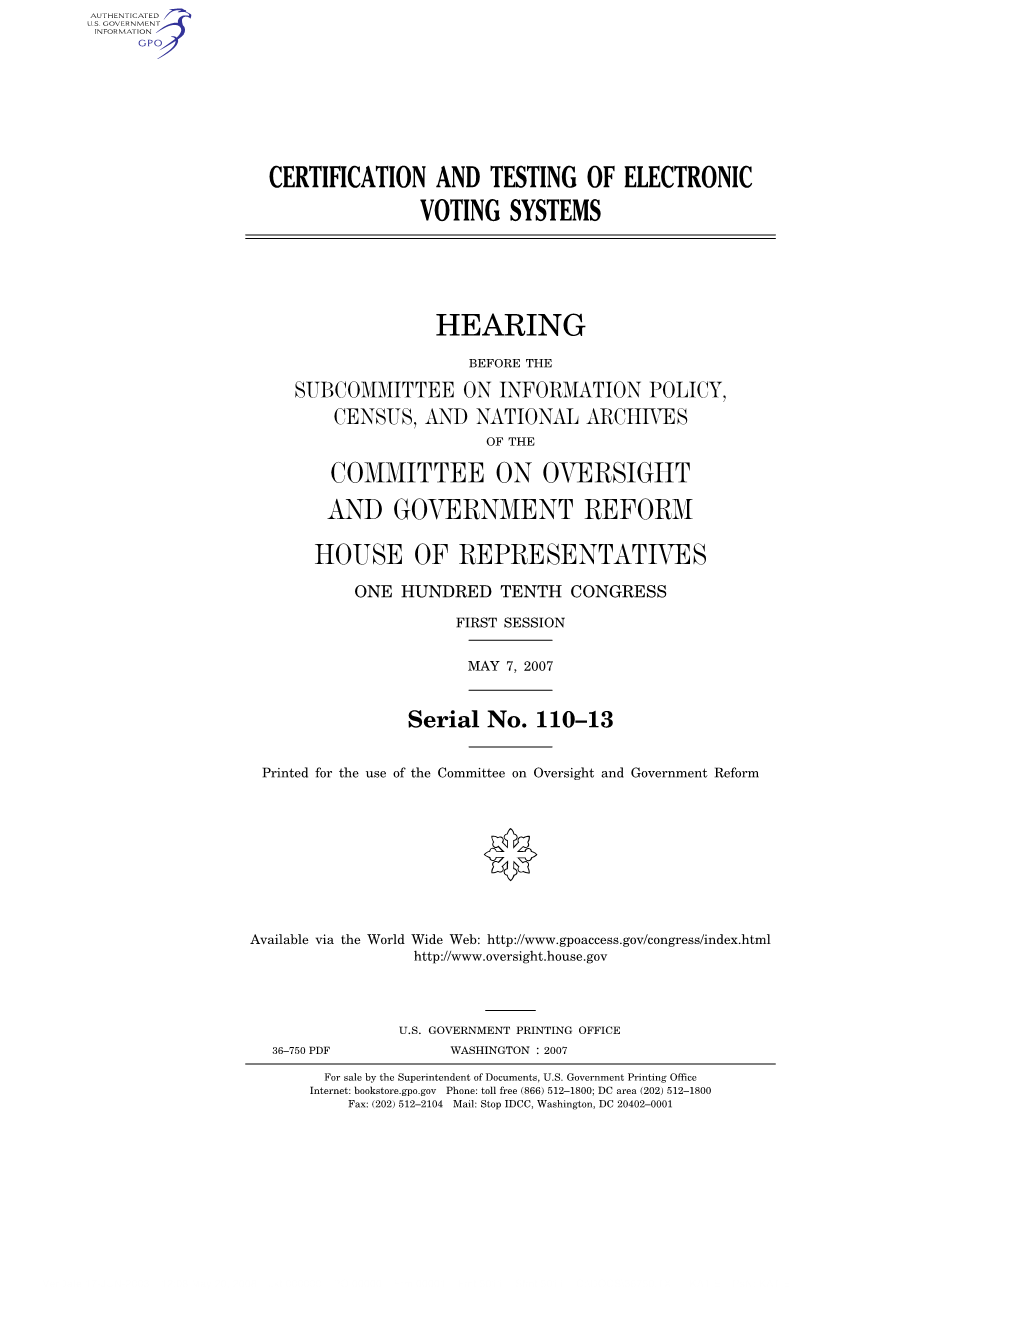 Certification and Testing of Electronic Voting Systems